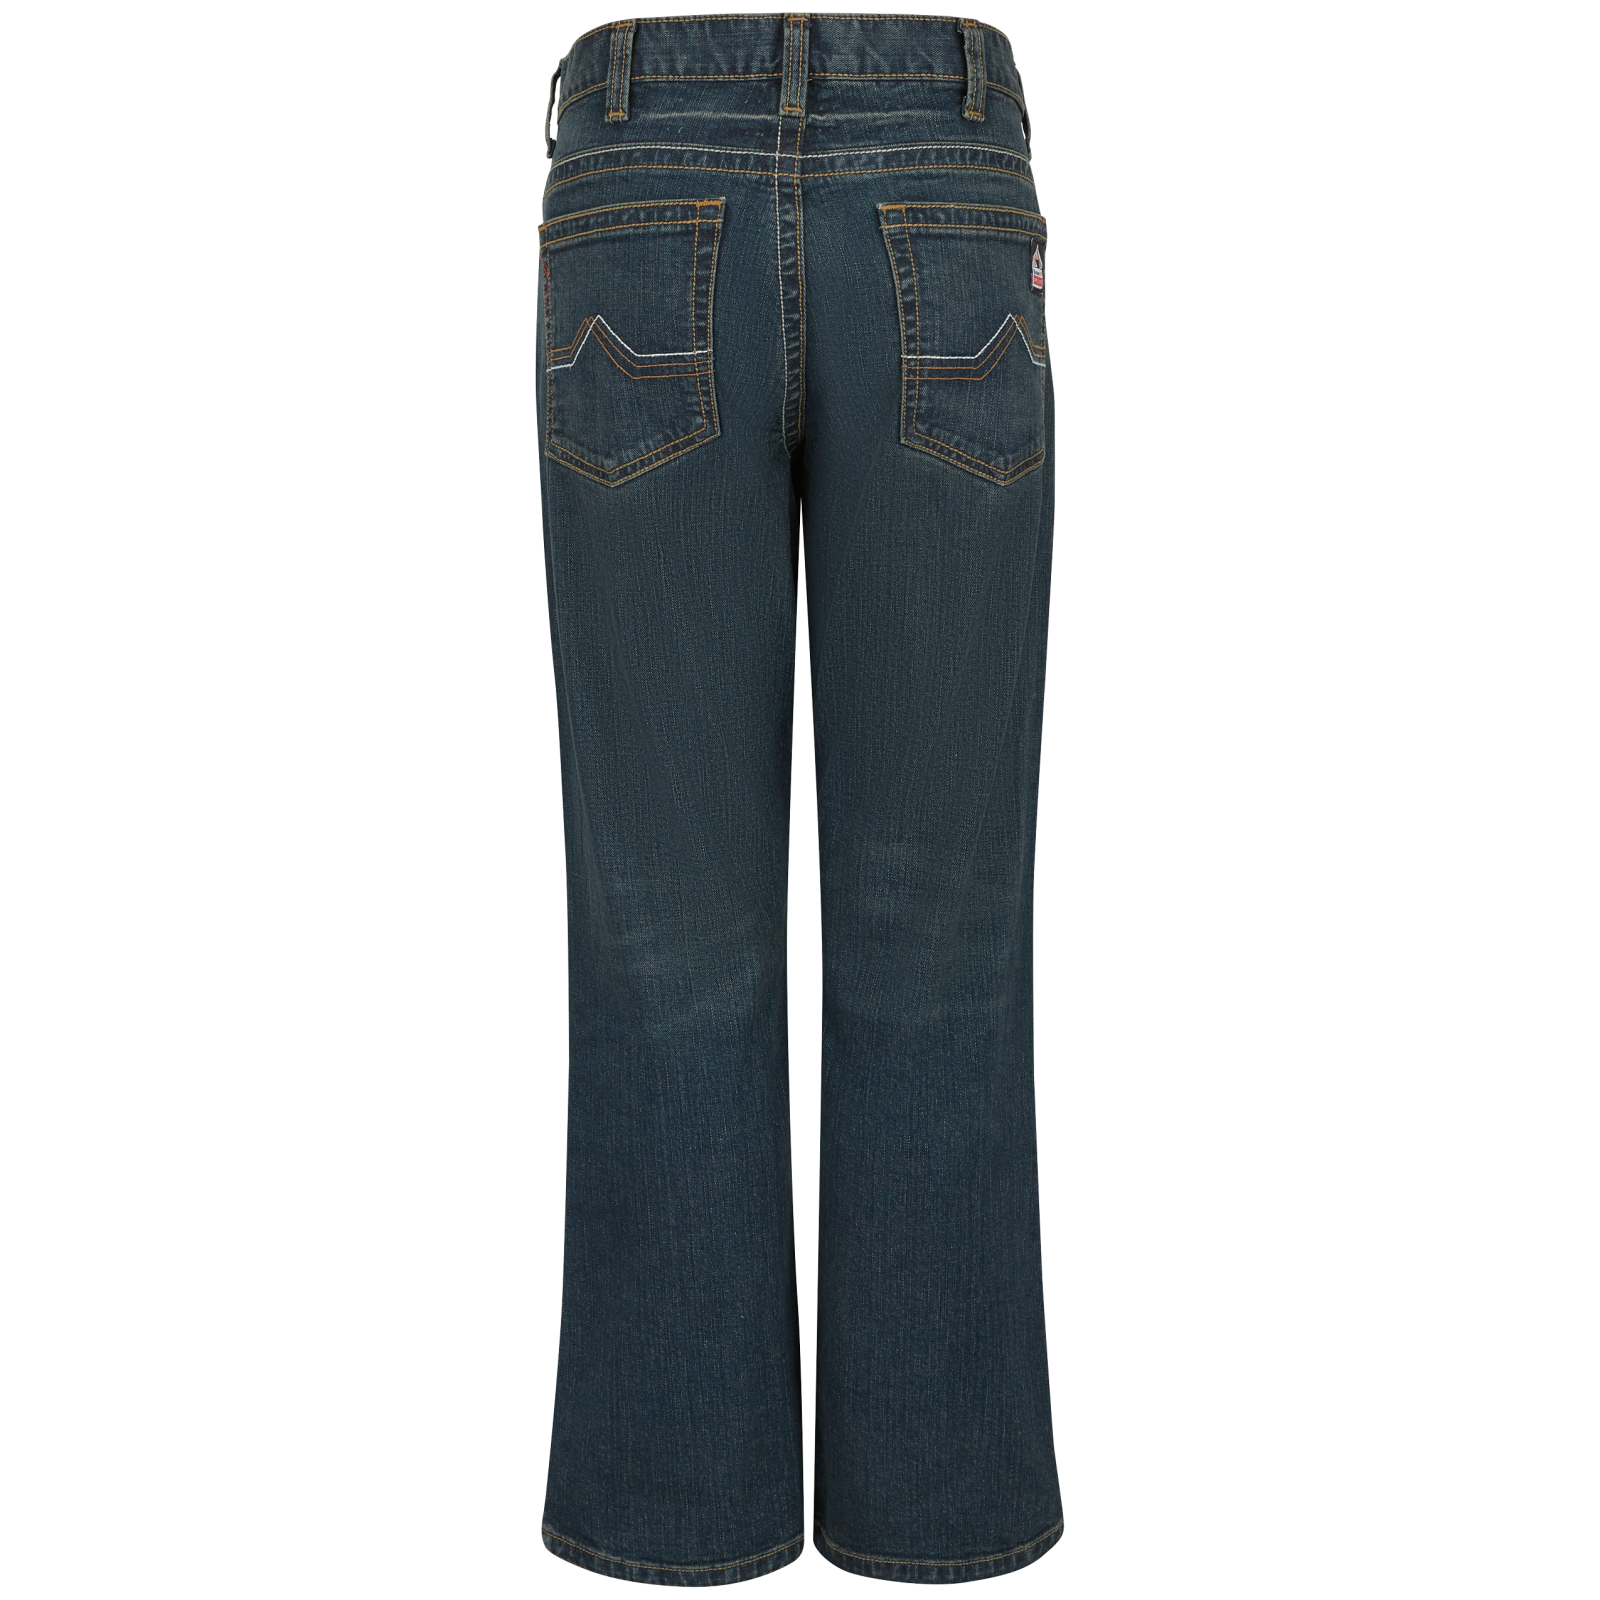 Discover more than 189 loose bootcut jeans best